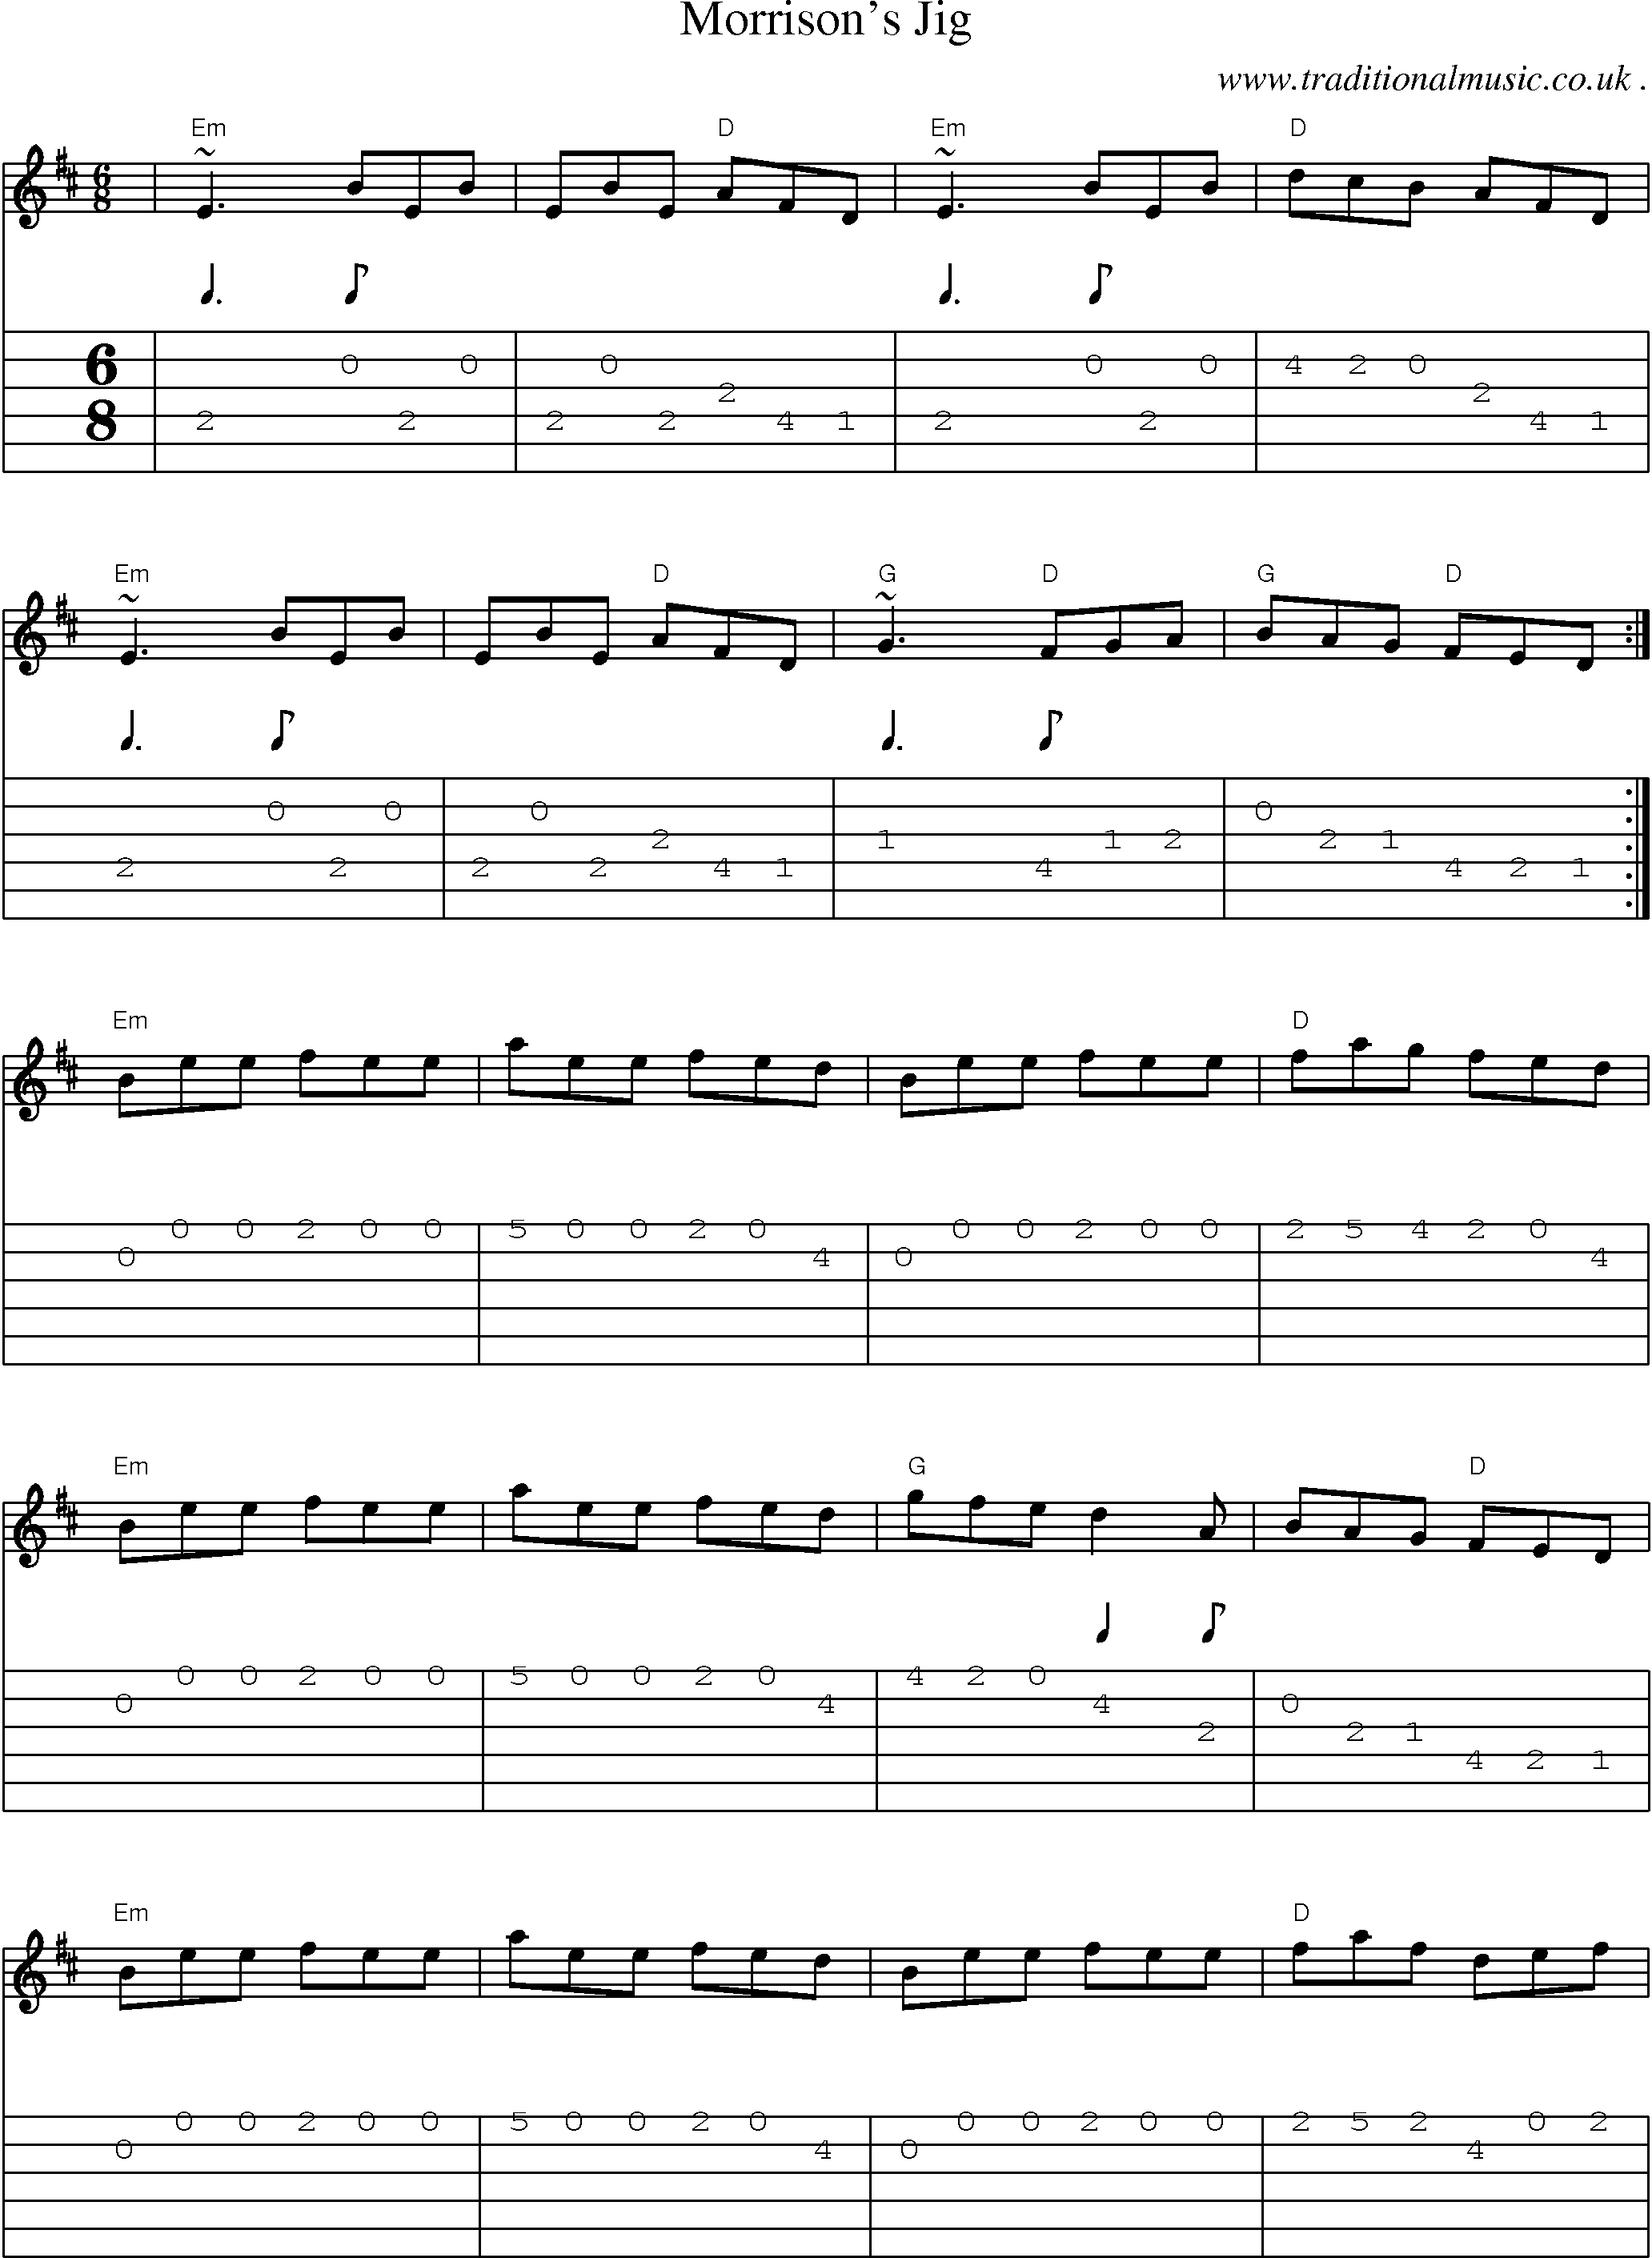 Music Score and Guitar Tabs for Morrisons Jig